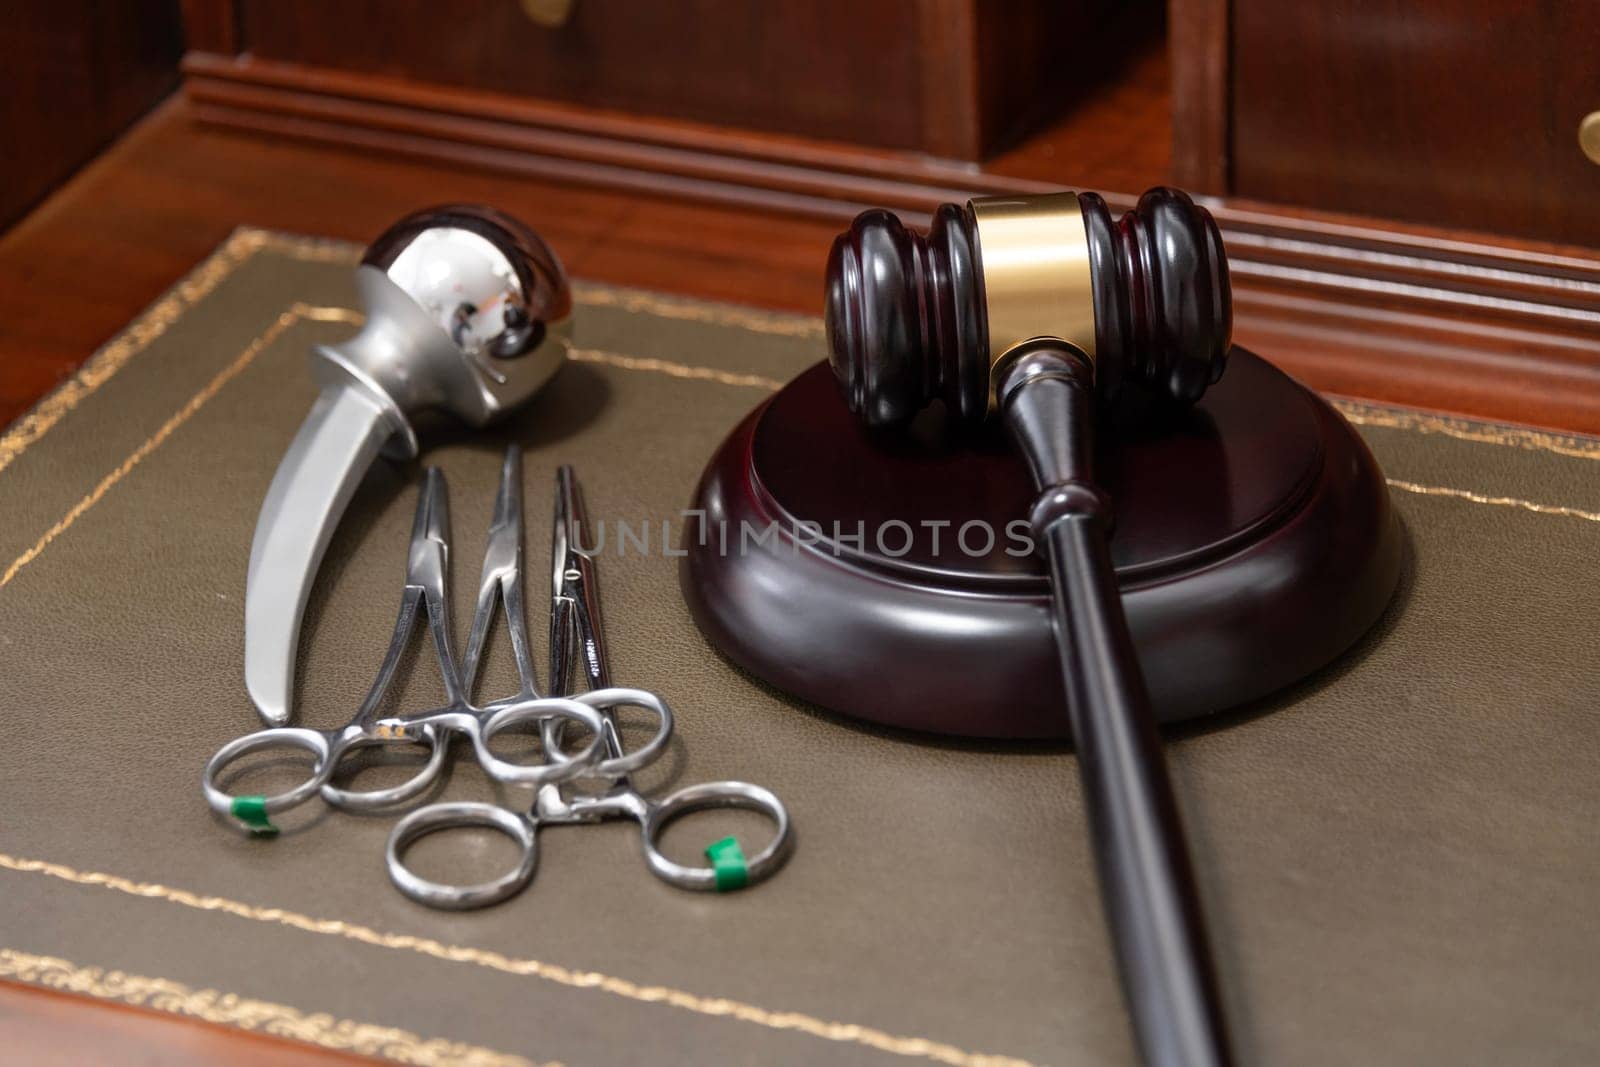 A professional judge's gavel lies next to medical tools, symbolizing legal issues in healthcare